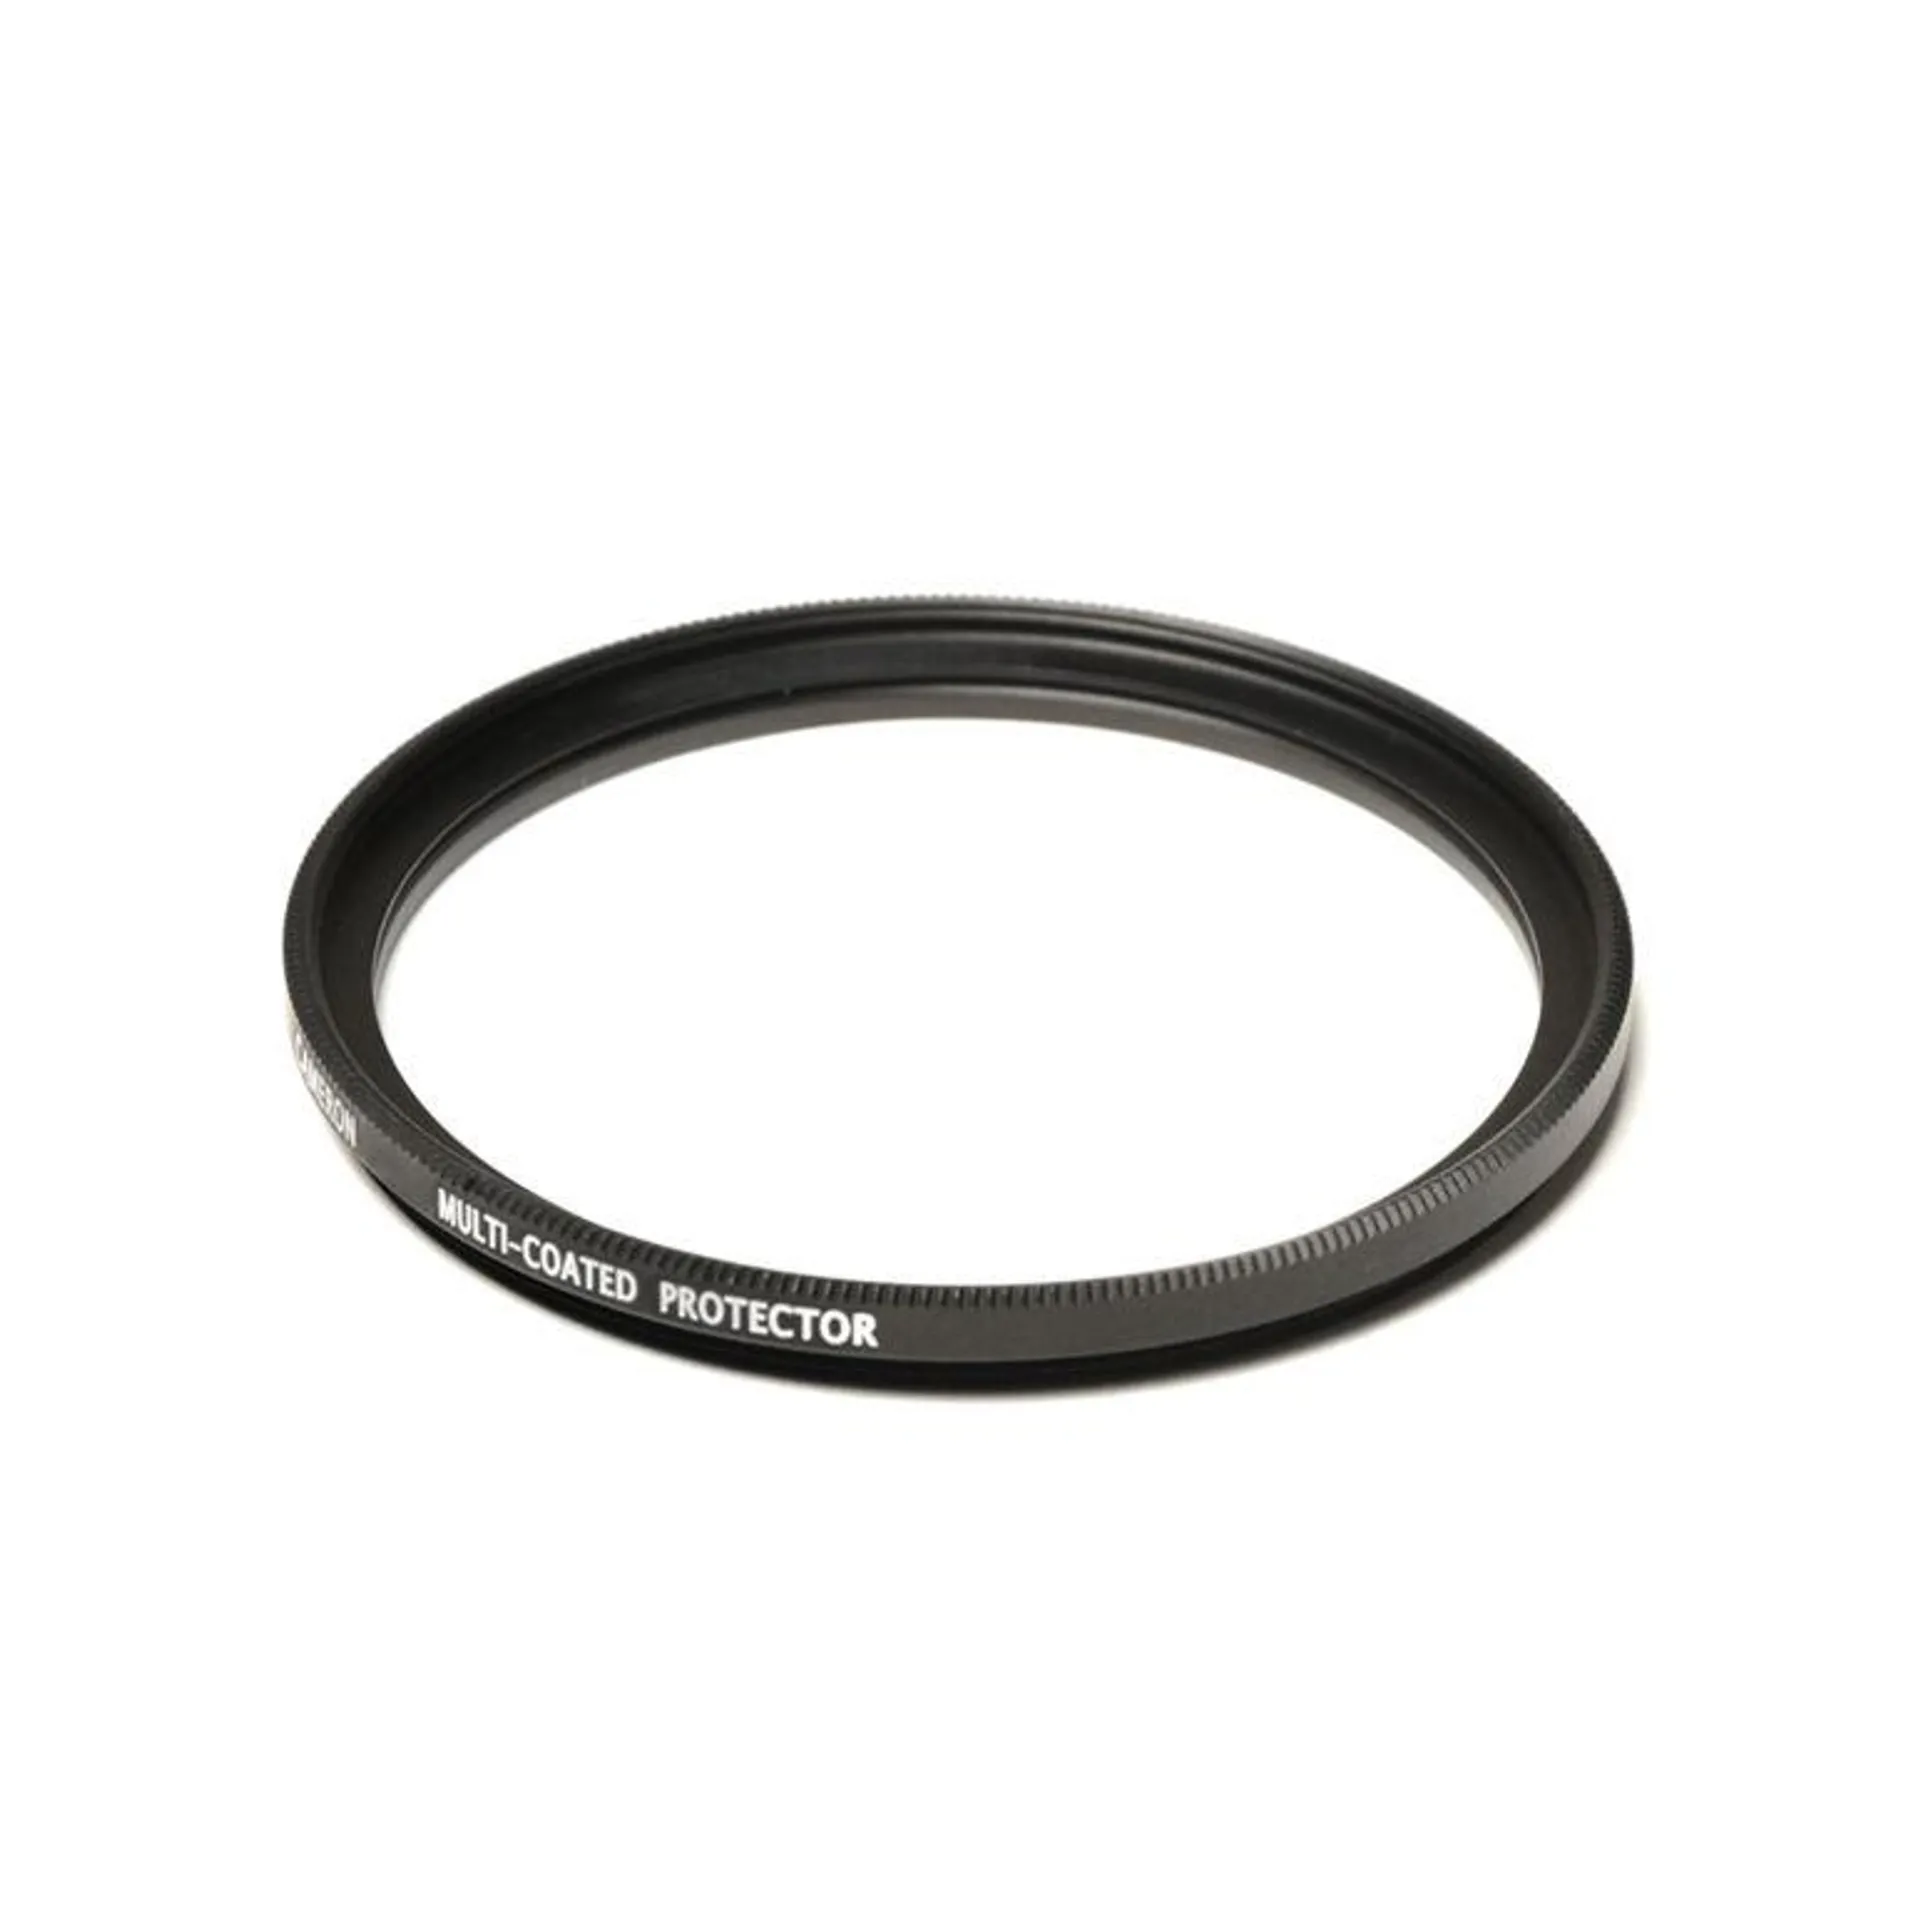 Cameron 55mm Multi-Coated Protector